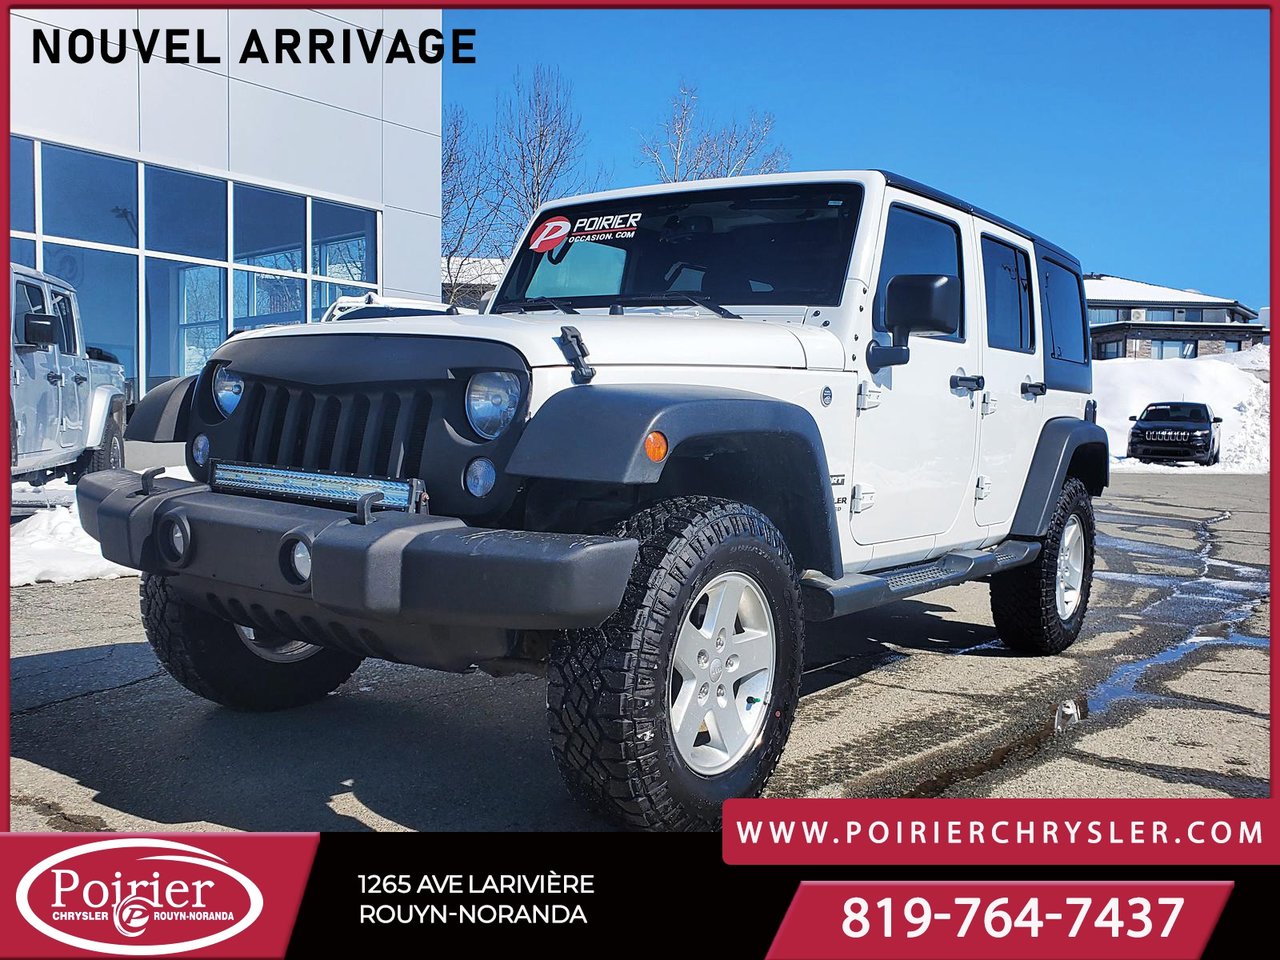 Used 2016 Jeep Wrangler Unlimited with 79,300 km for sale at Otogo